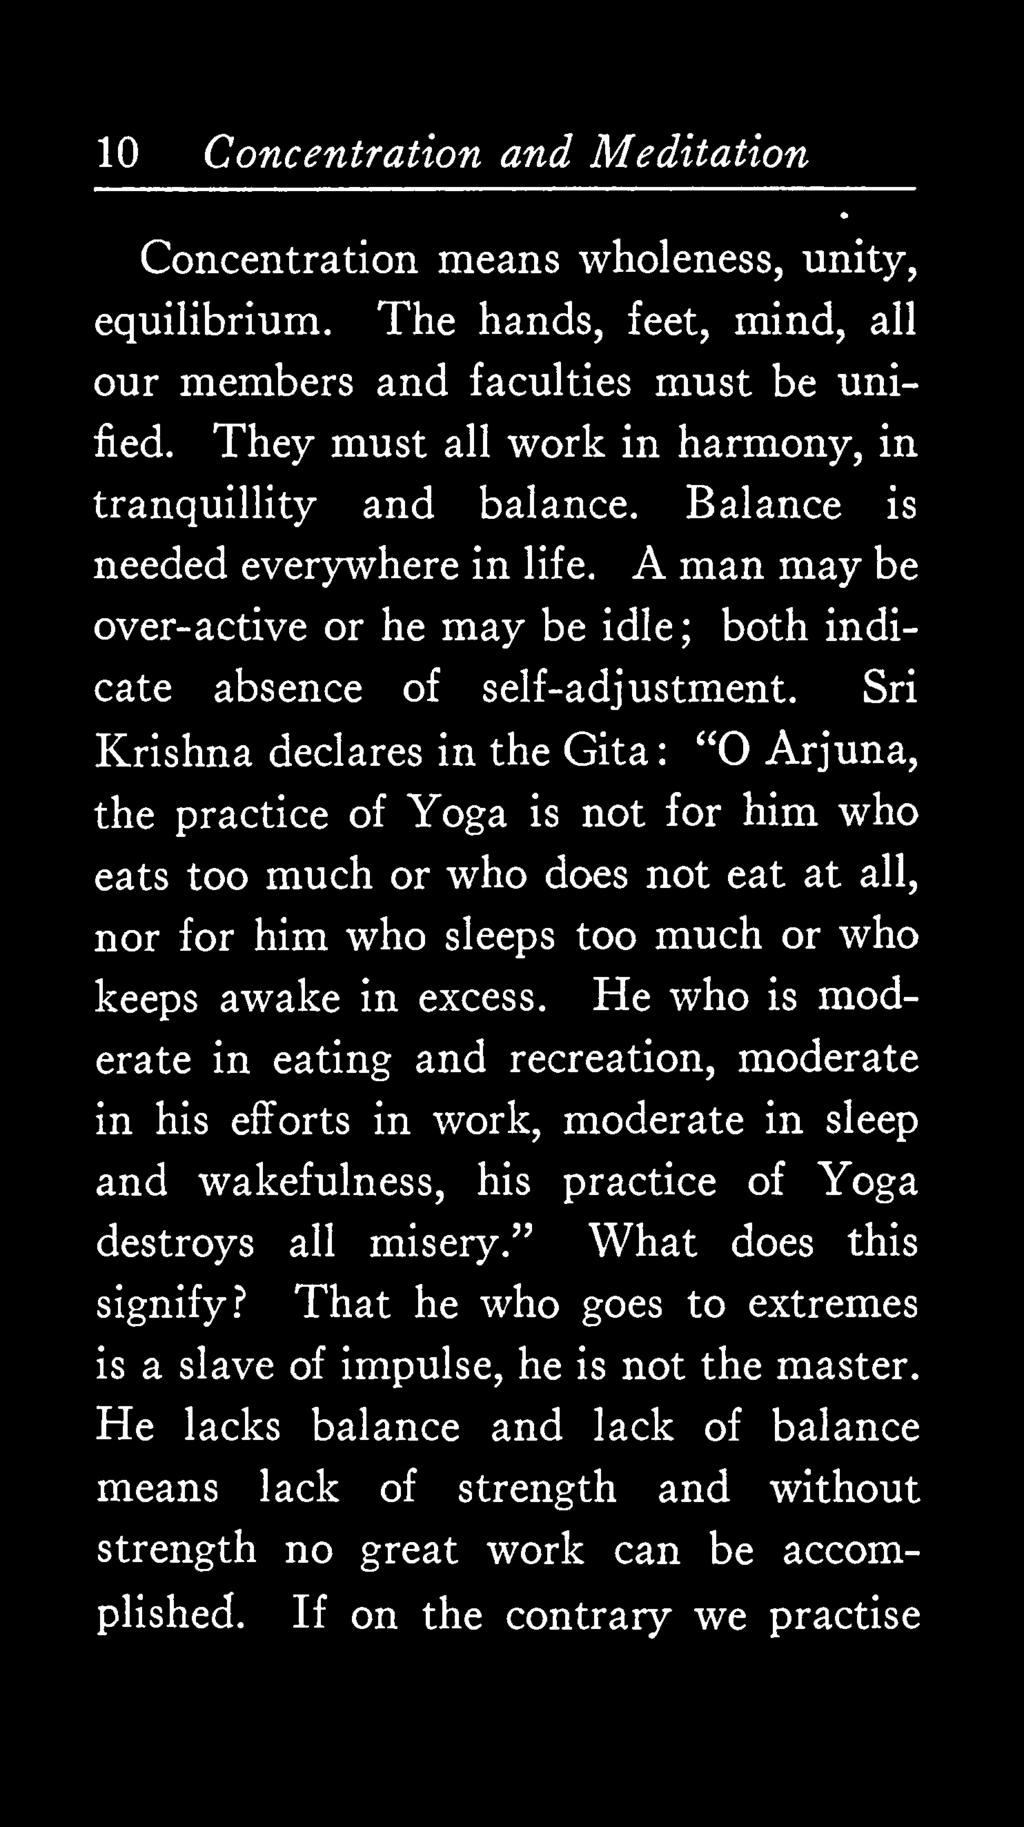 Sri Krishna declares in the Gita : "O Arjuna, the practice of Yoga is not for him who eats too much or who does not eat at all, nor for him who sleeps too much or who keeps awake in excess.